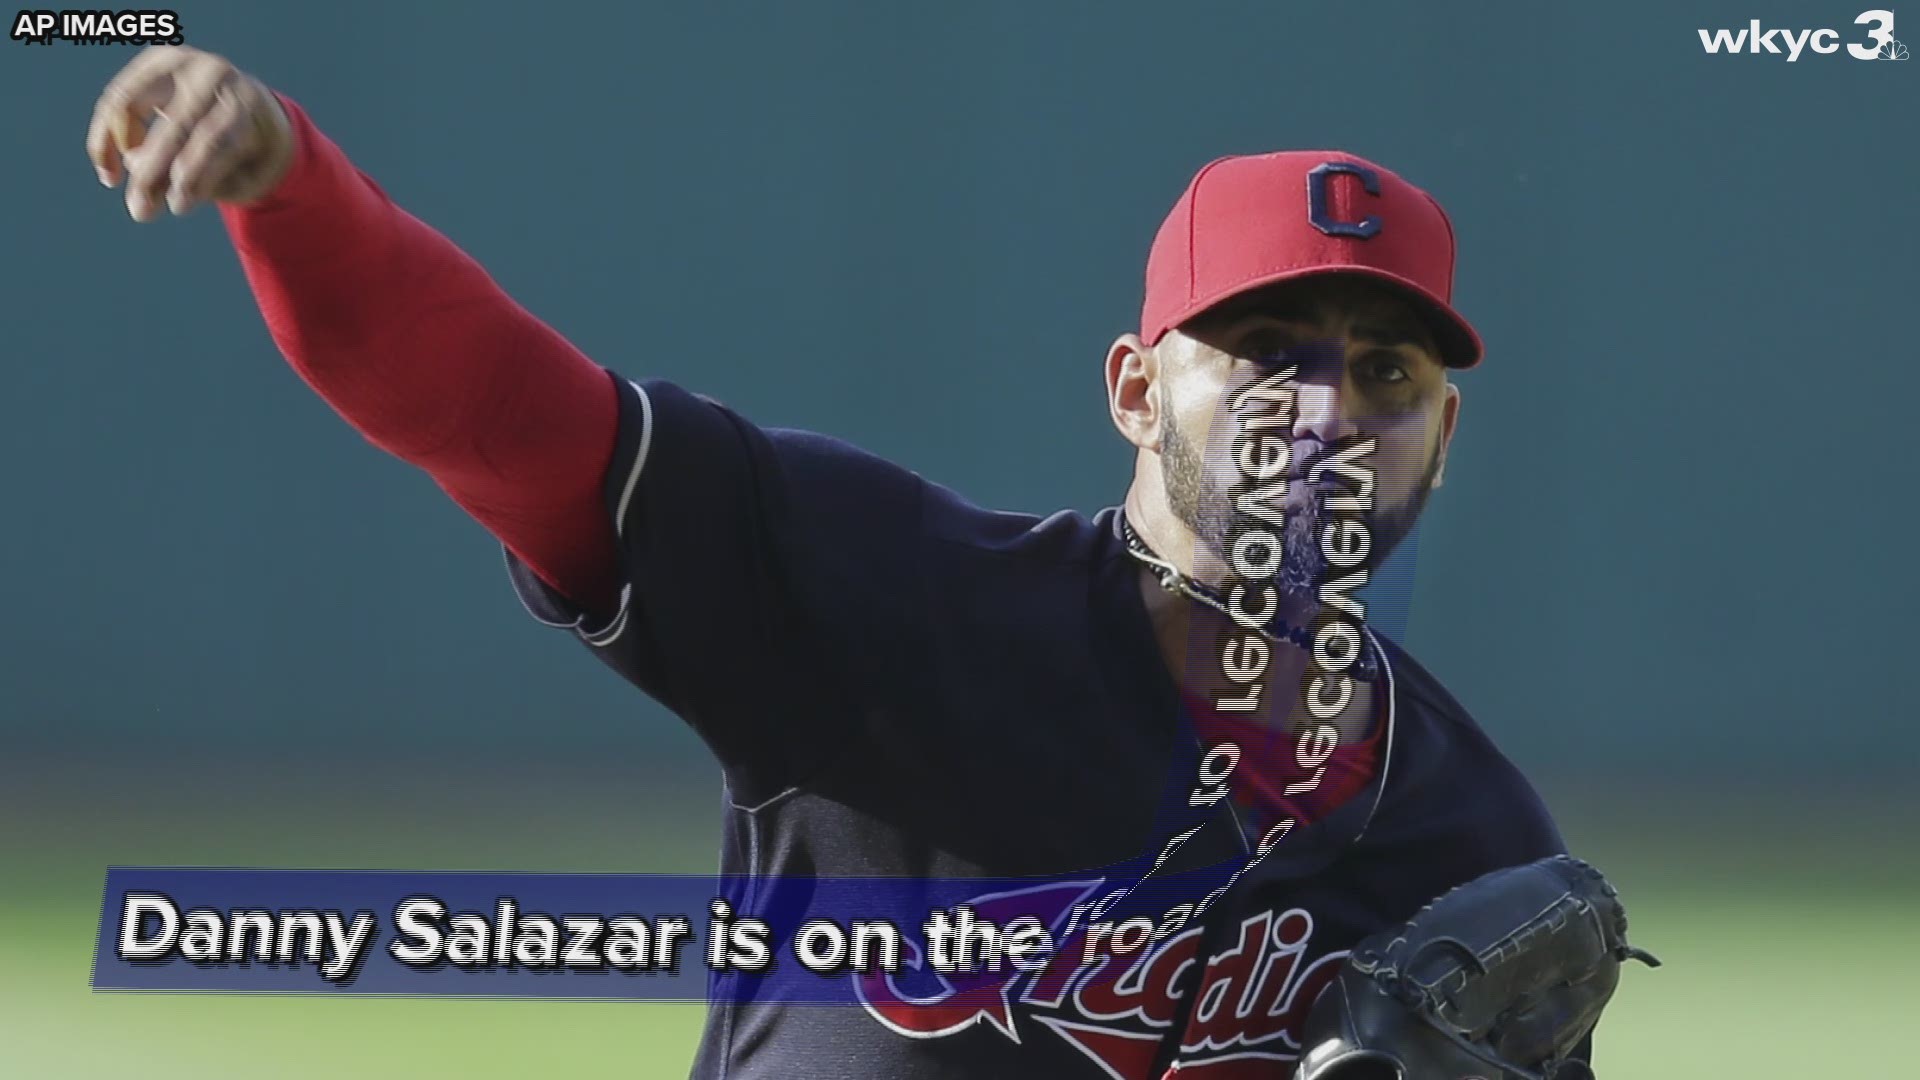 Danny Salazar is on the road to recovery.  The Cleveland Indians starting pitcher will make a rehab start for the Double-A Akron RubberDucks on Monday.